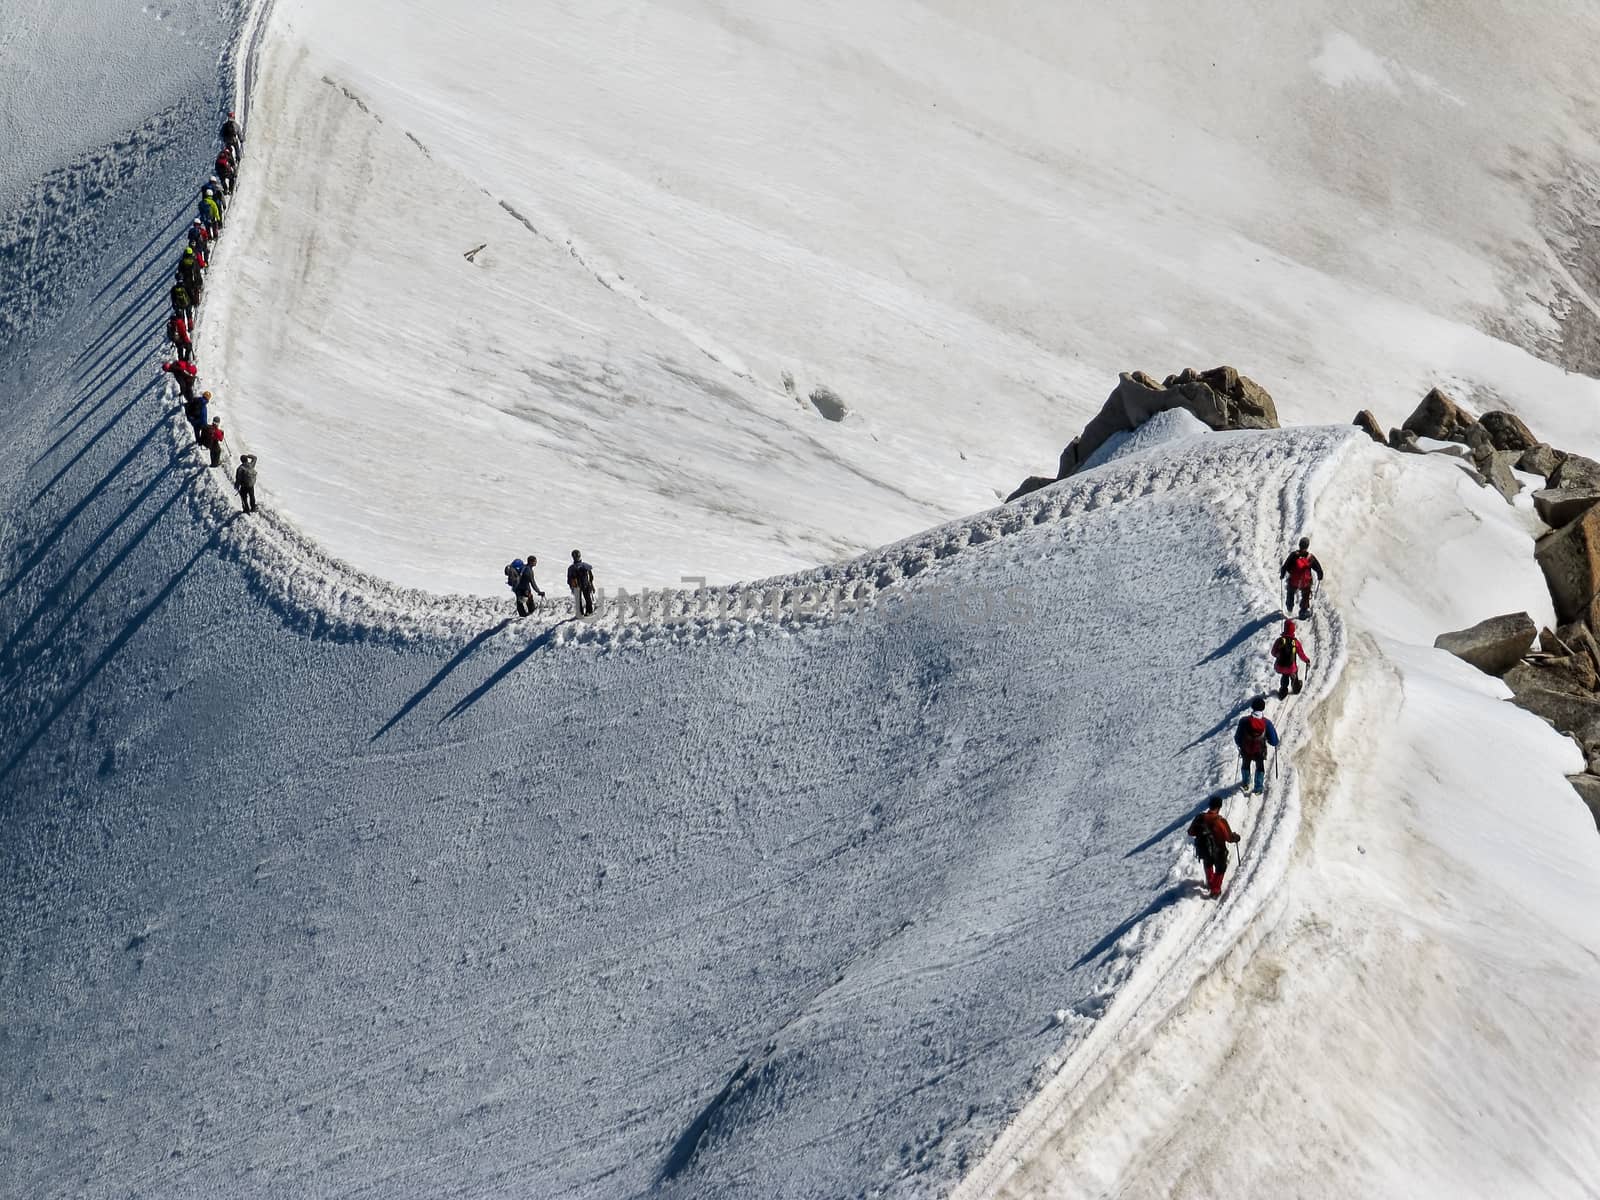 Trekkers on Aiguille Du Midi, in the french alps  by magicbones